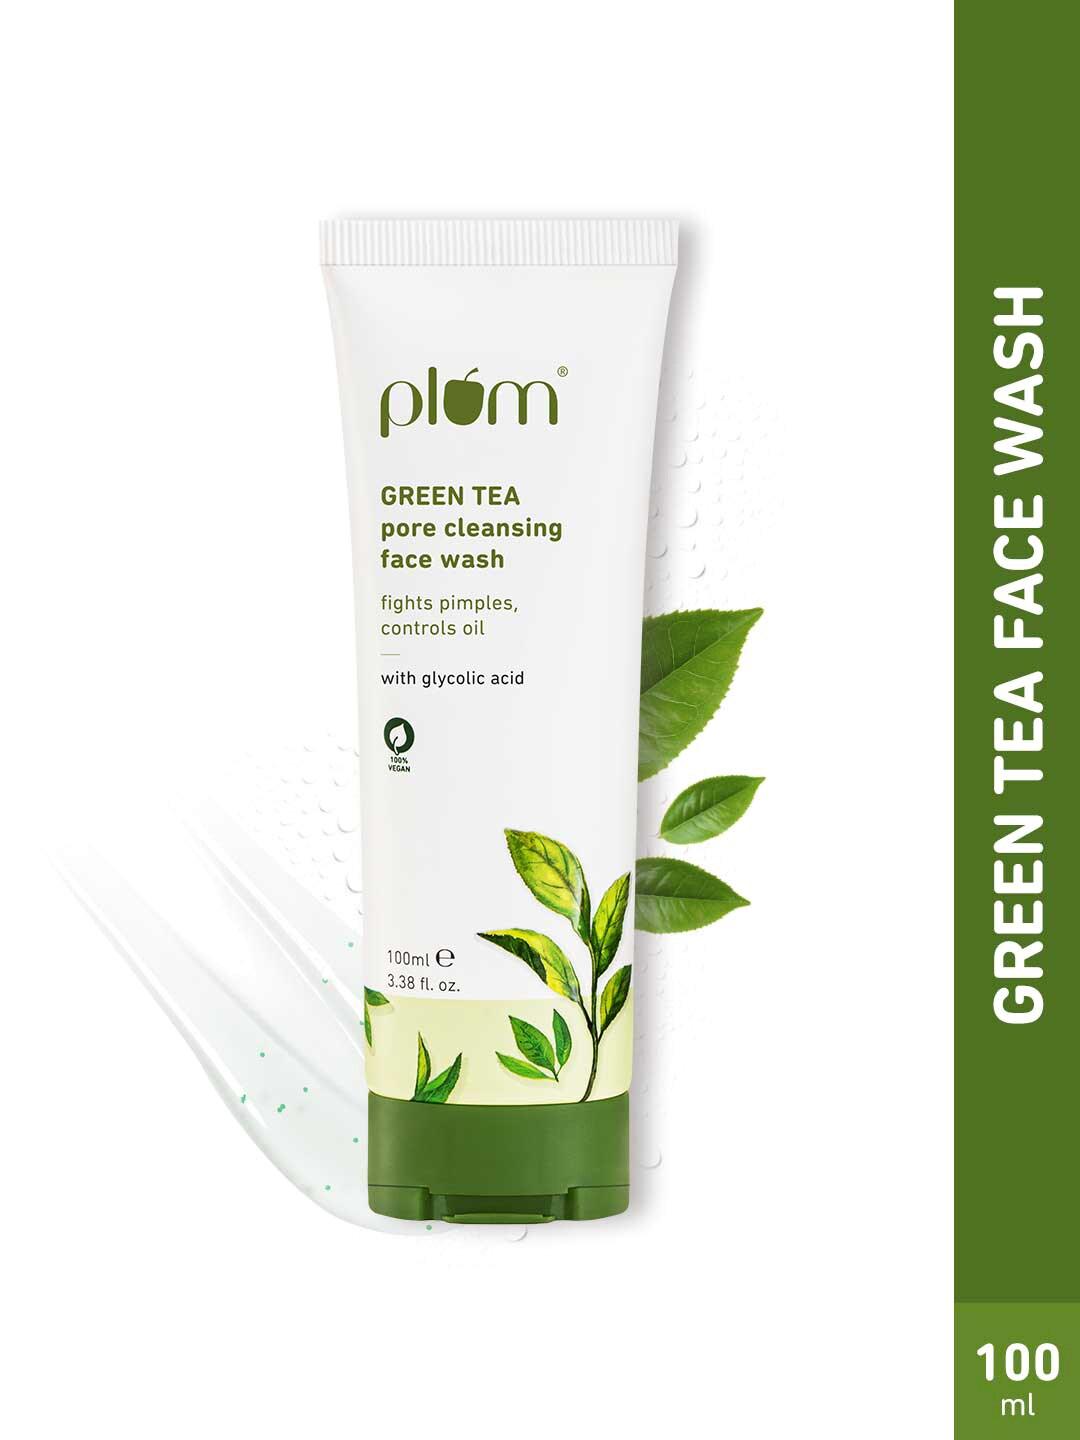 plum-green-tea-pore-cleansing-face-wash-with-glycolic-acid-for-acne-&-oil-control---100ml